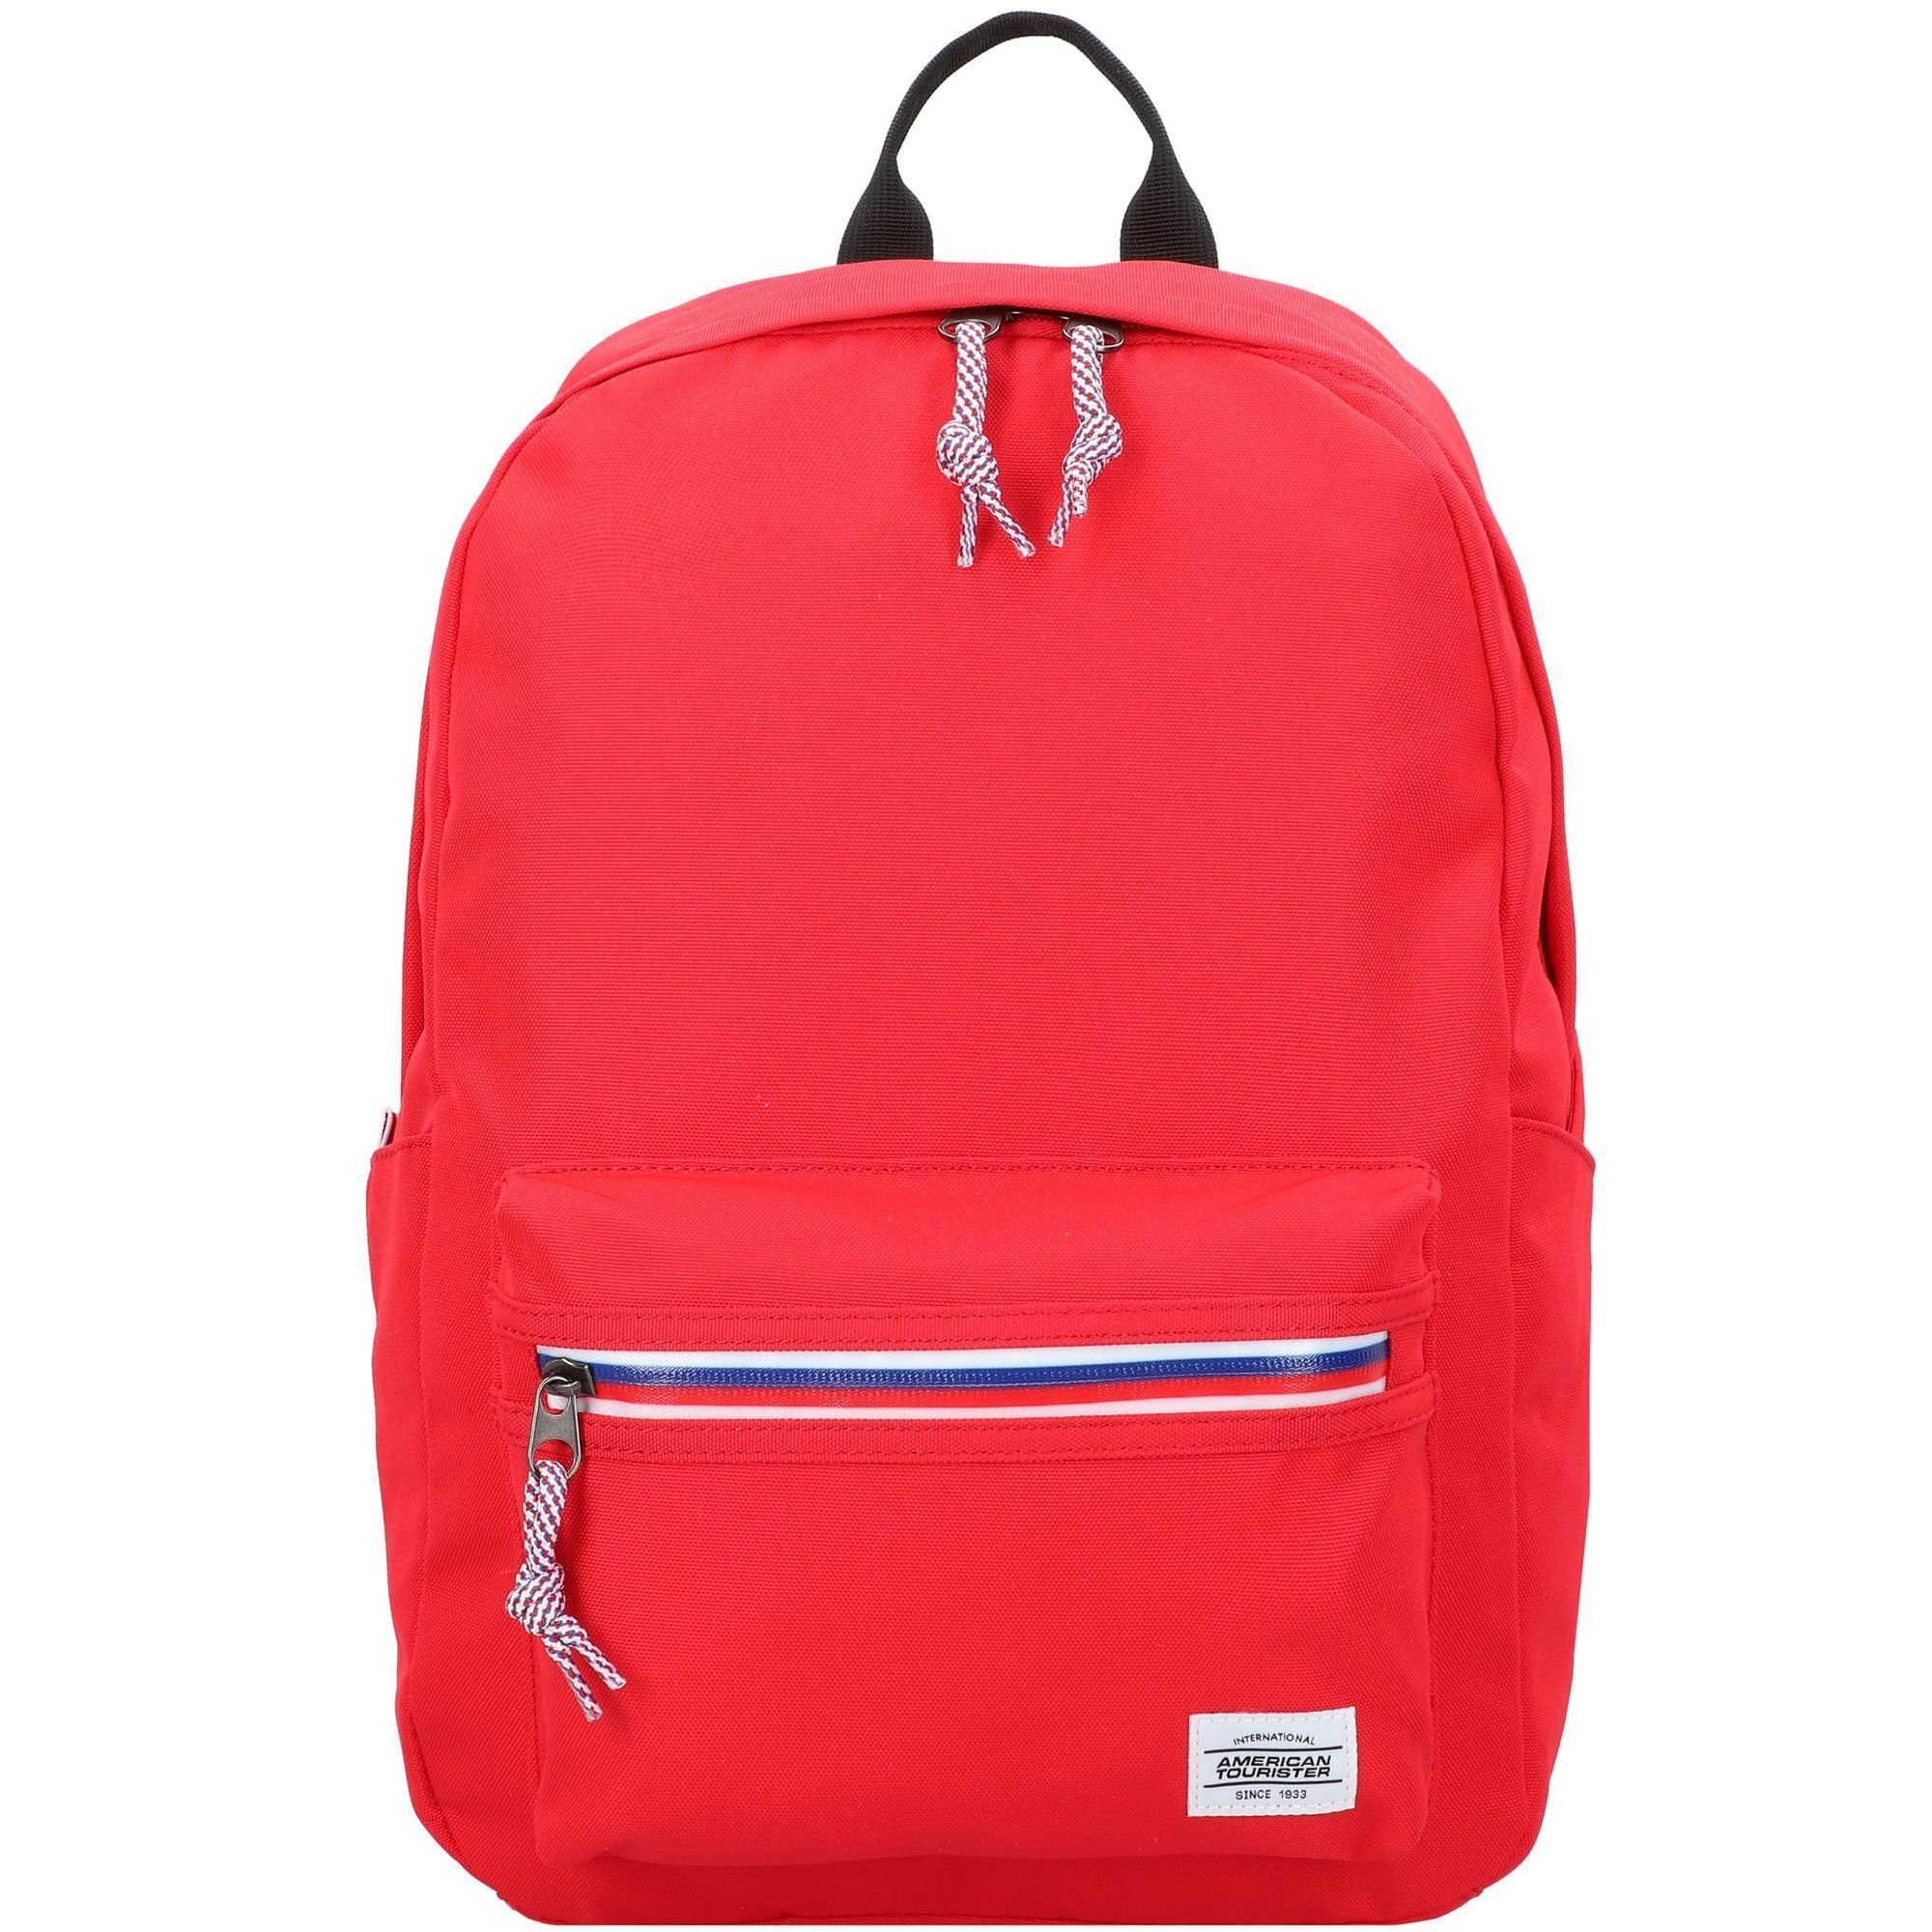 American Tourister® Rucksack Upbeat, Polyester red